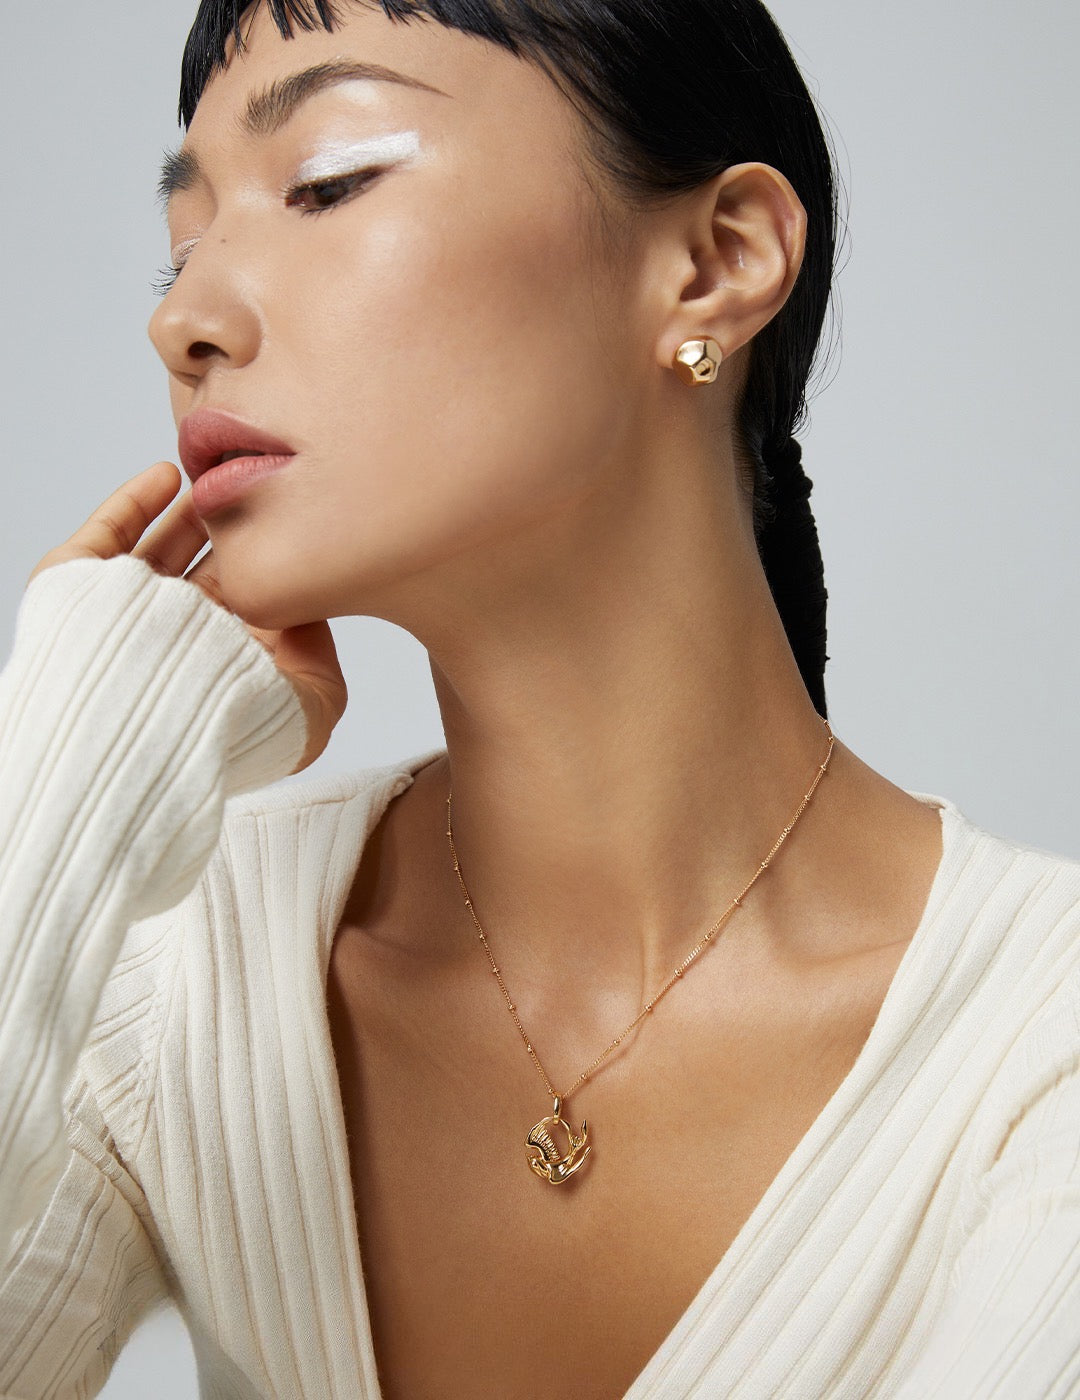 A captivating masterpiece inspired by the Mythical Bird - S925 Sterling Silver with 18K Gold Vermeil - Radiate elegance and embrace your inner strength